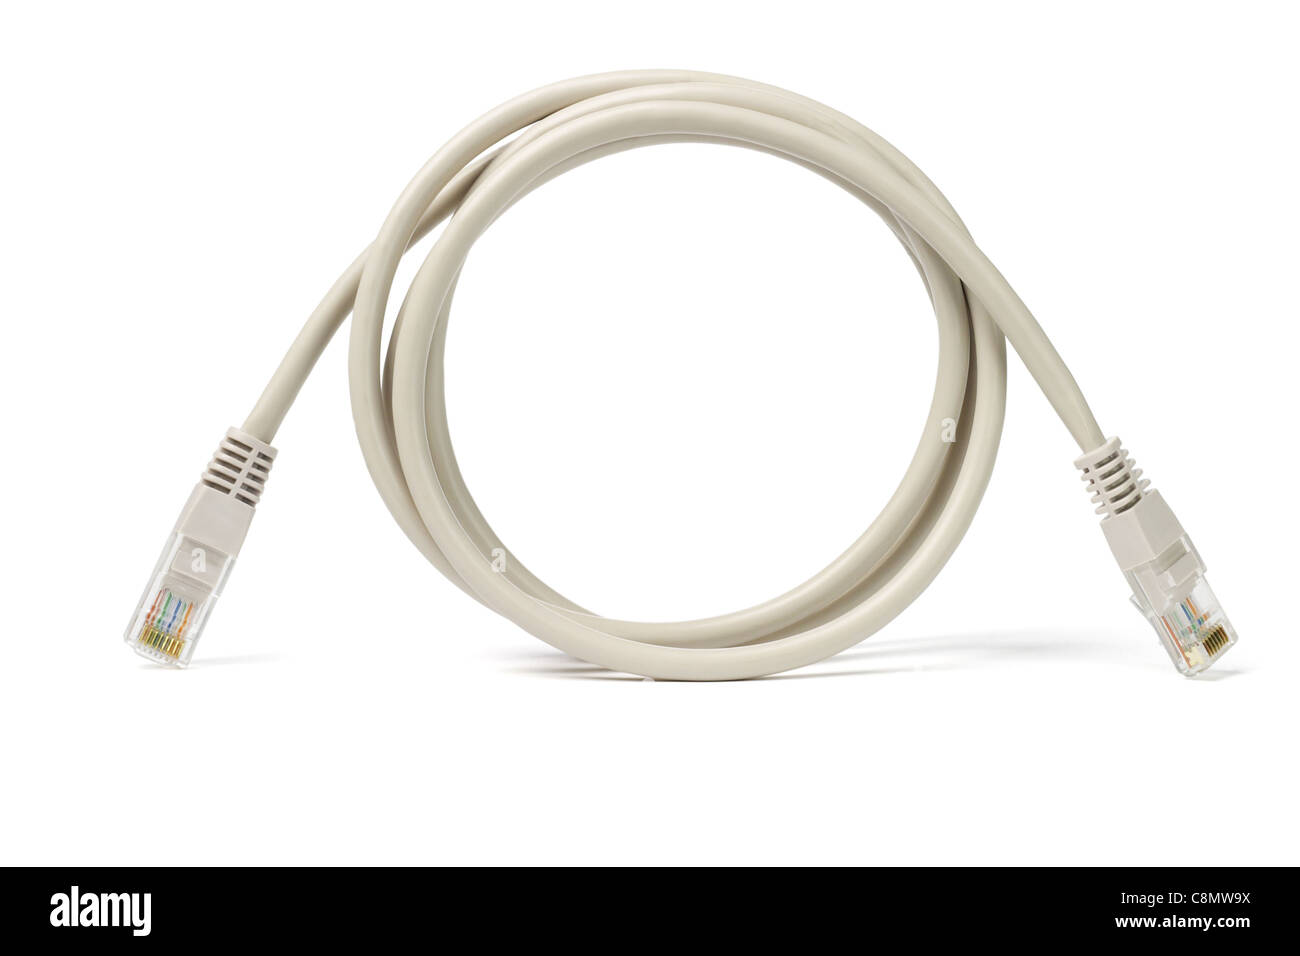 Close up of network cable and plugs on white background Stock Photo